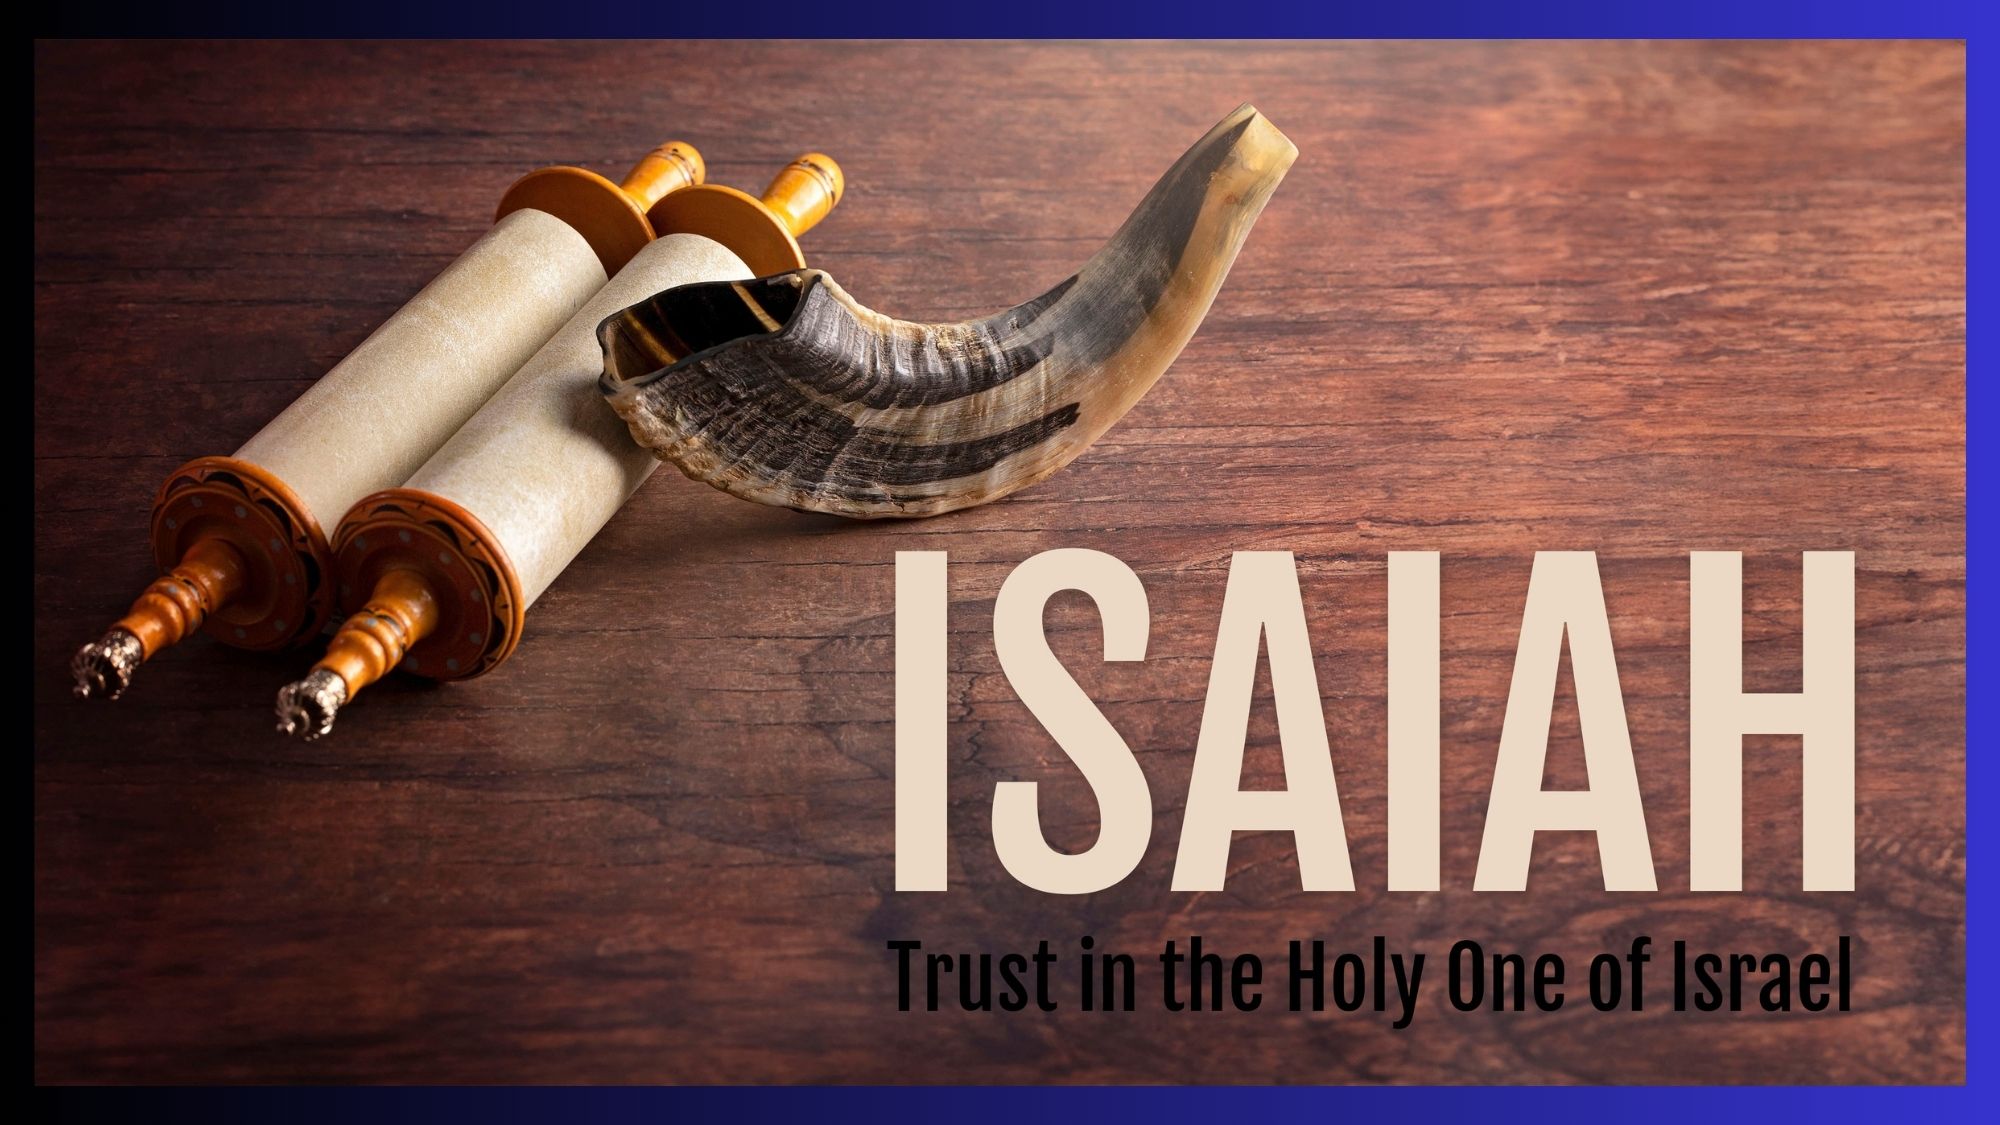 Isaiah "Trust in the Holy One of Israel" Lessons 1 & 2 Intro & Chapter 1